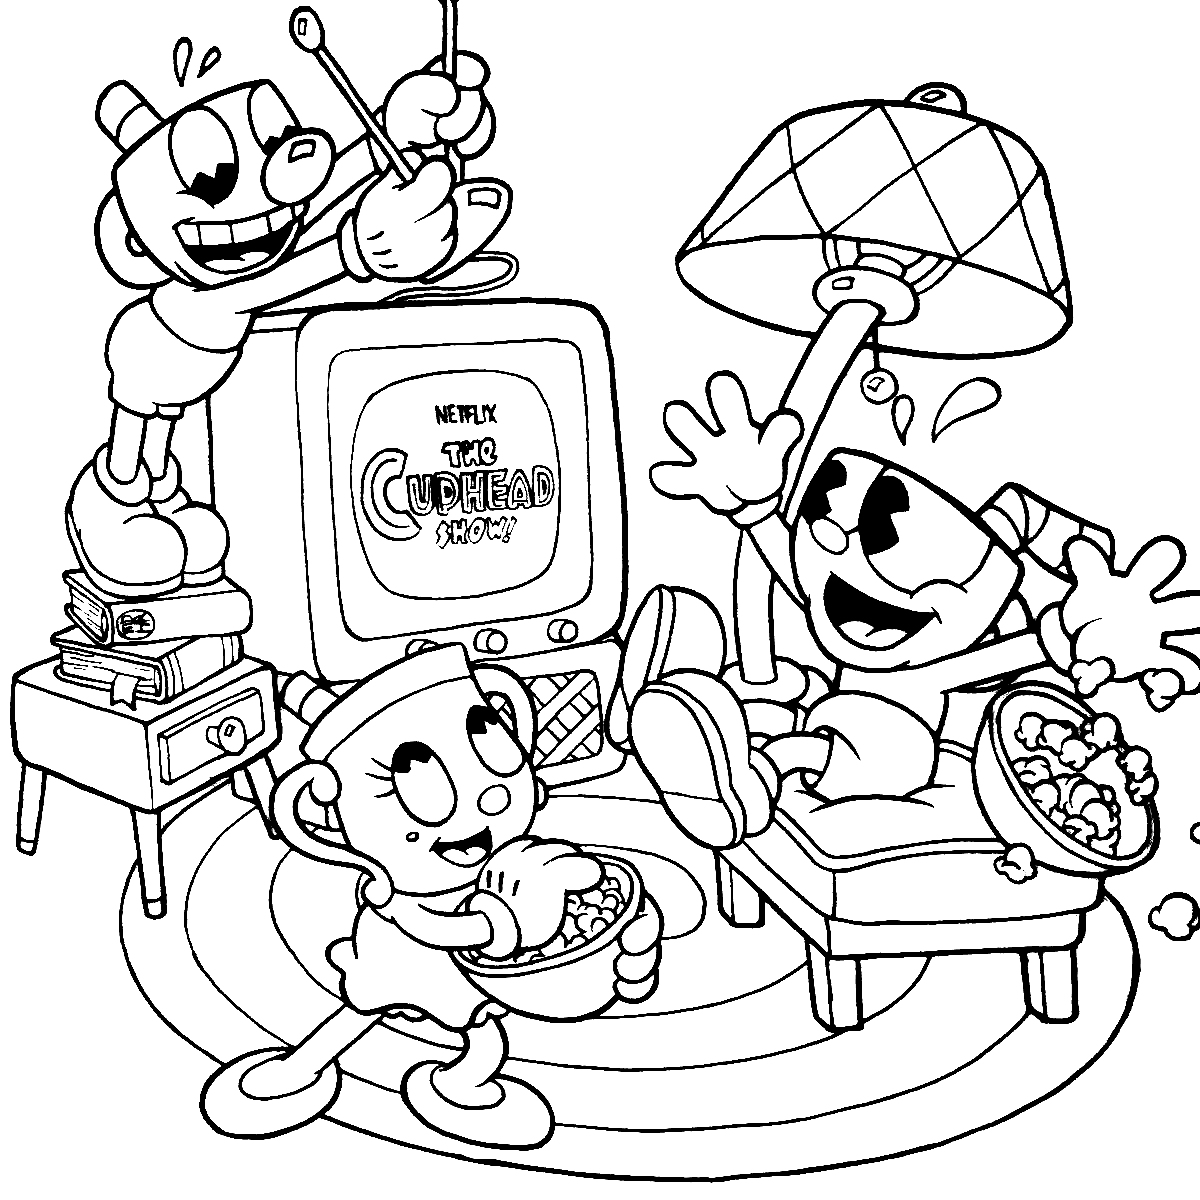 Cuphead And Friends Coloring Page